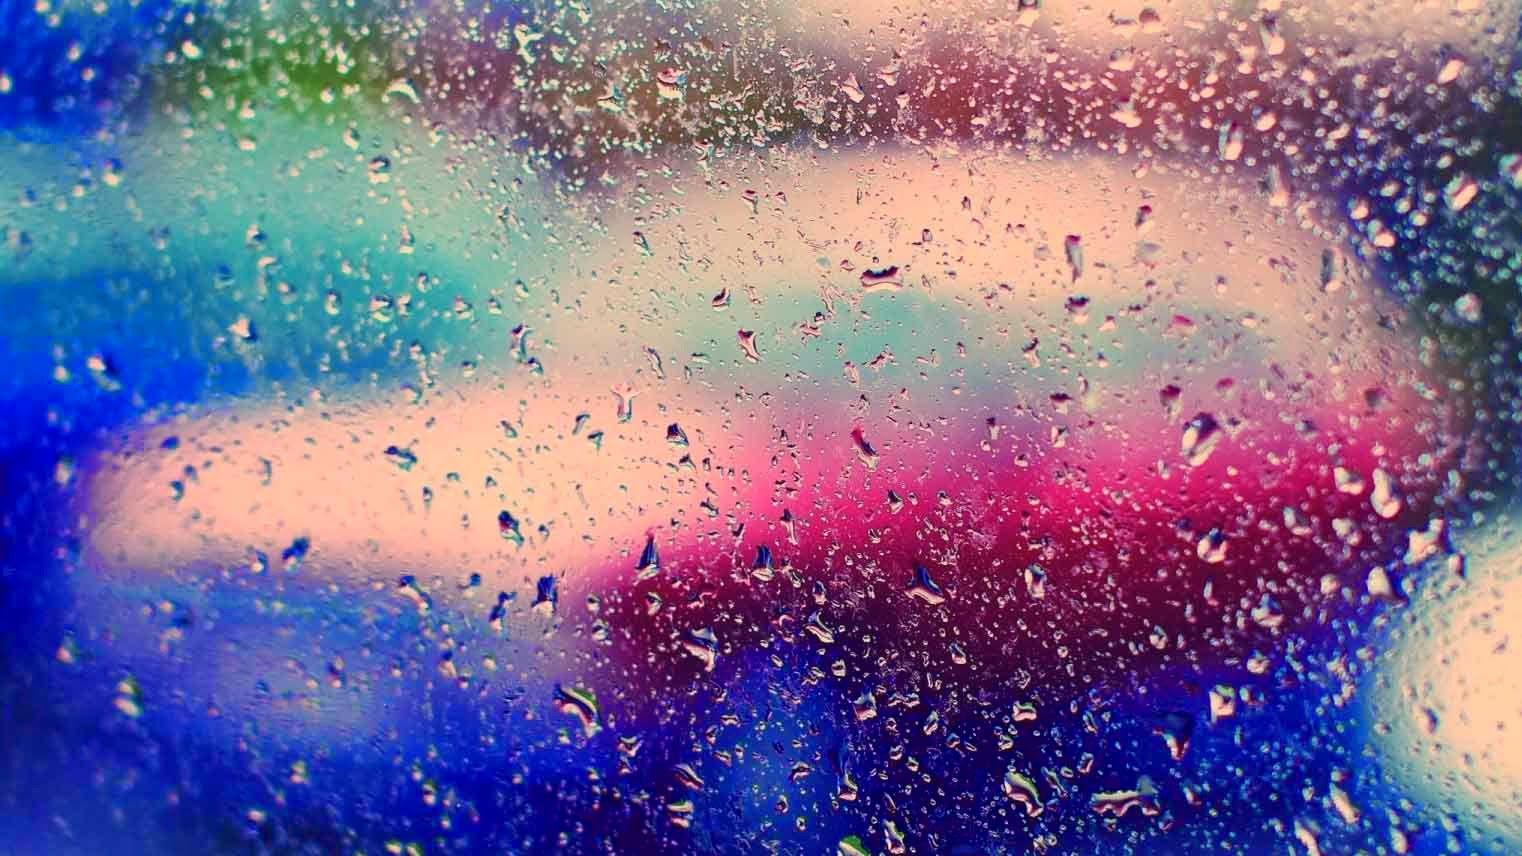 Top 28 Raindrops HD Wallpapers for Your Desktop Tinydesignr